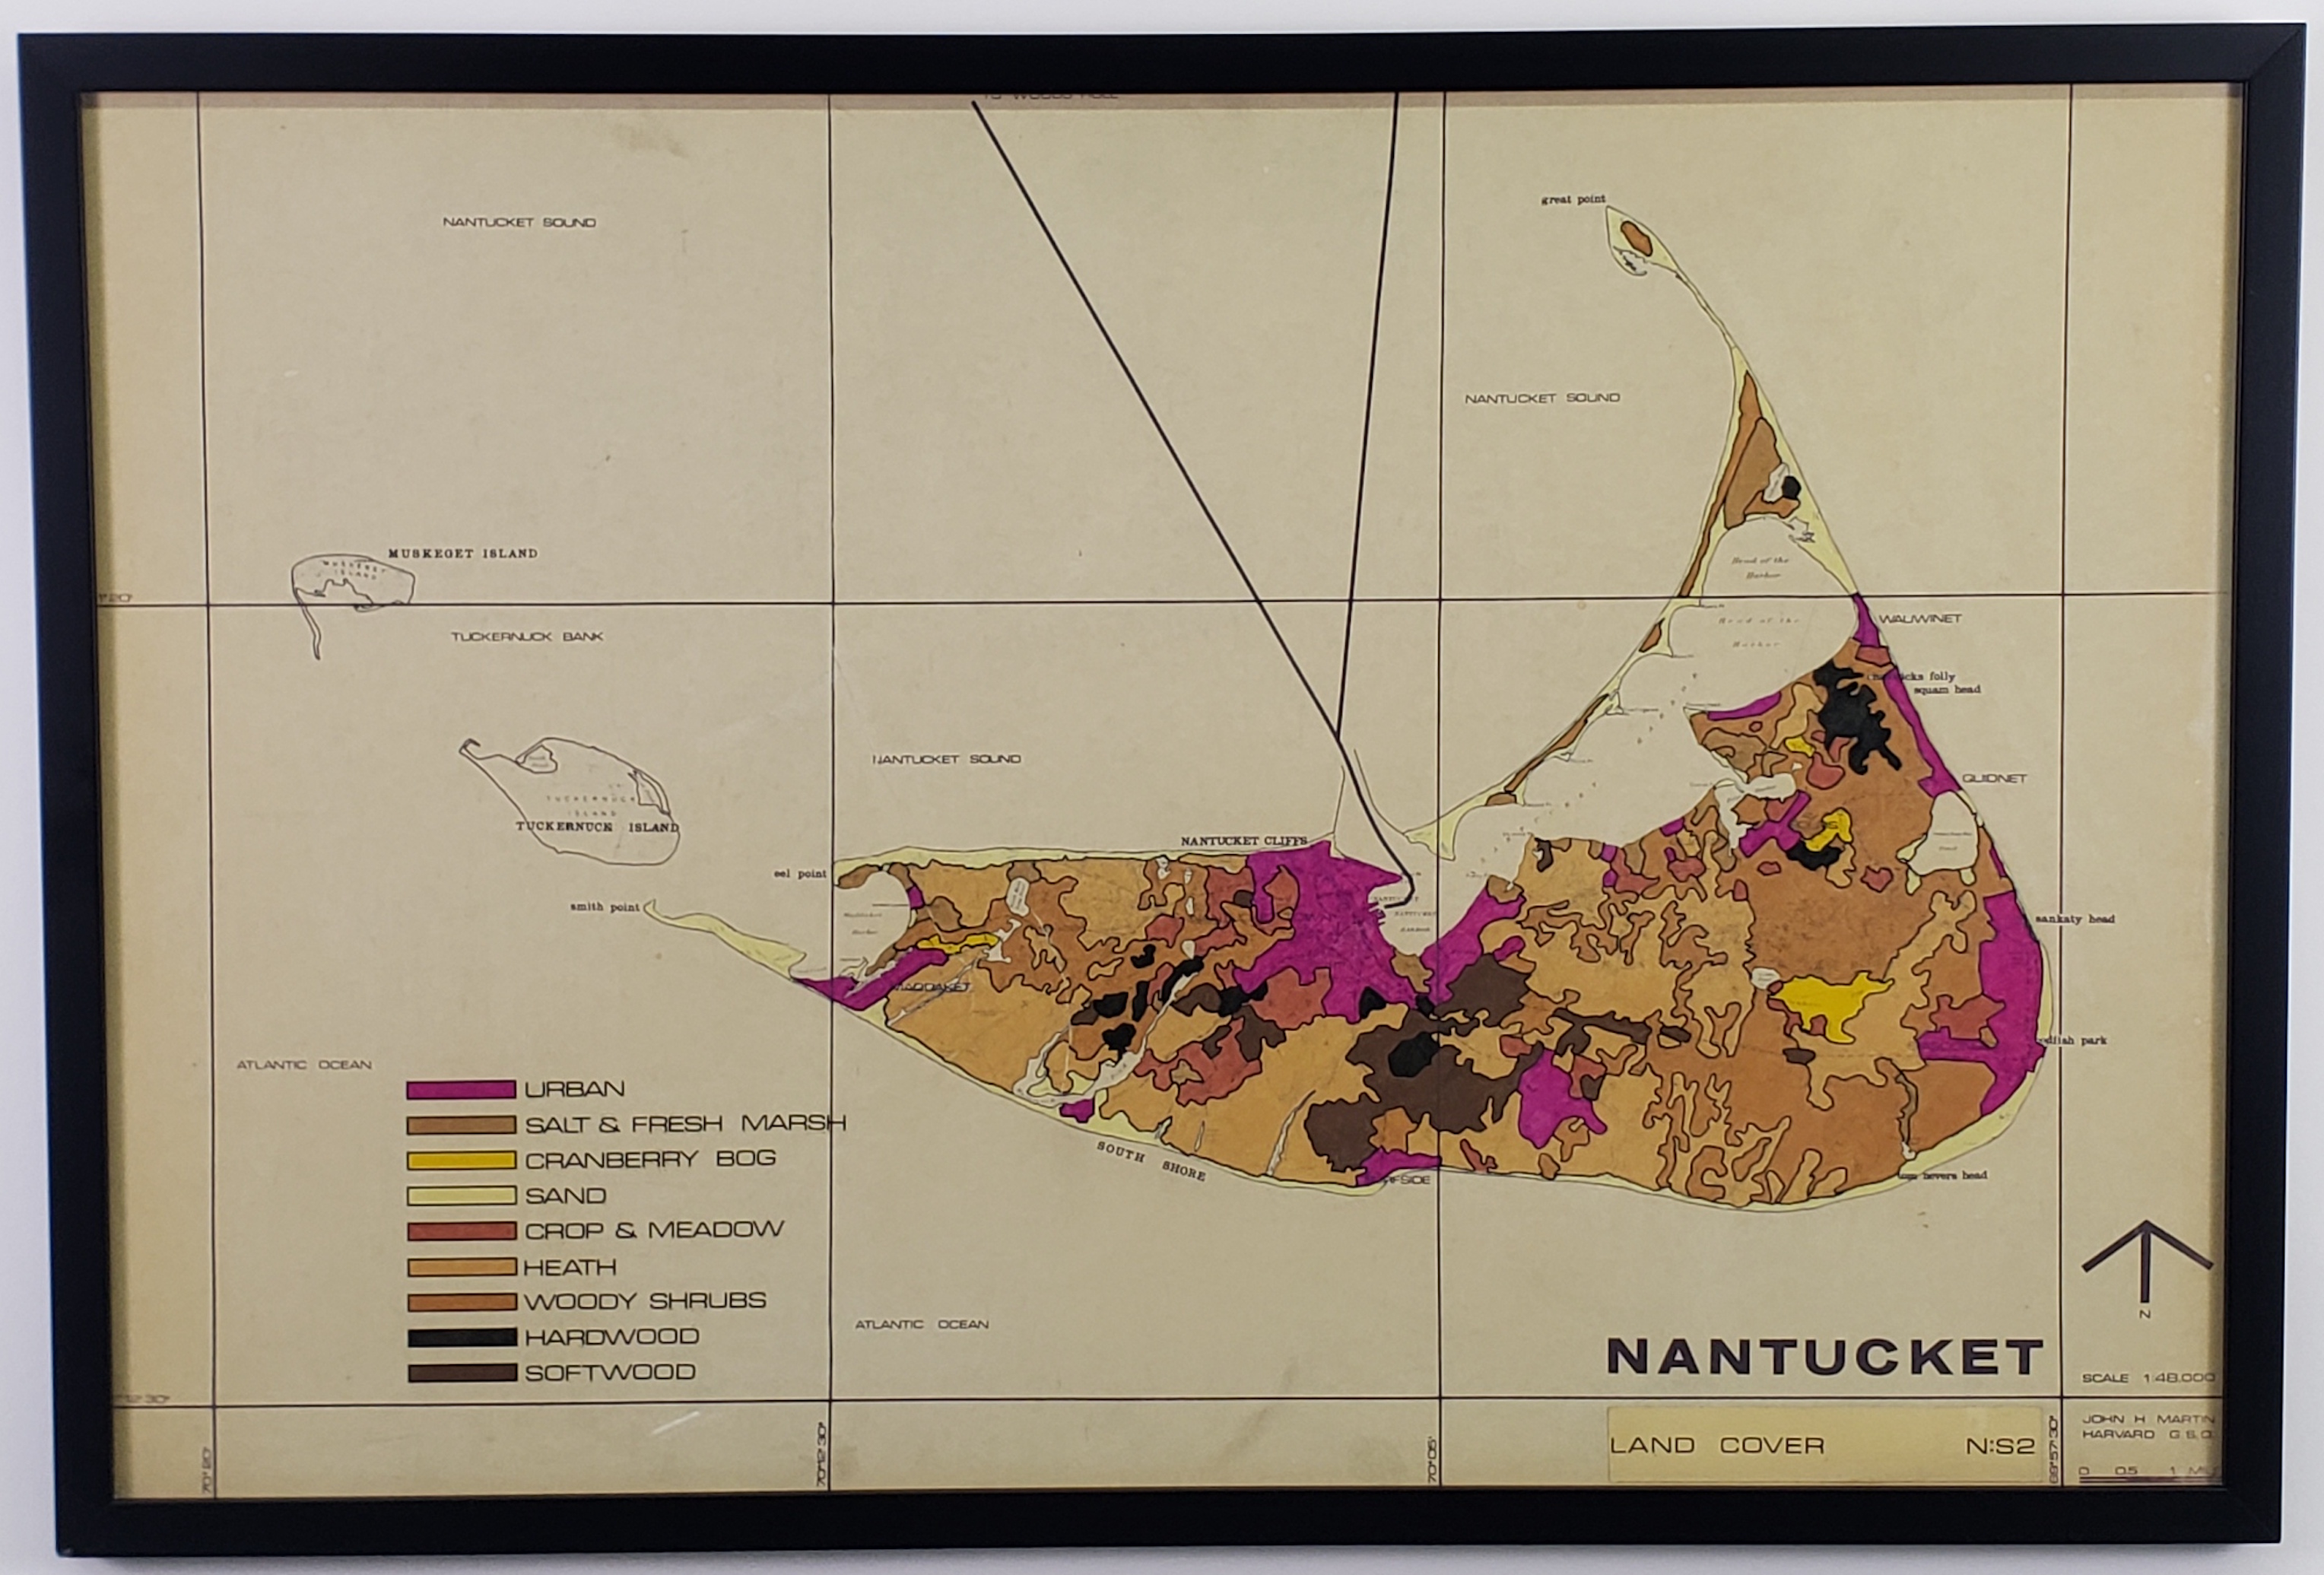 Vintage John H. Martin Colored, “Land Cover”, Map of Nantucket